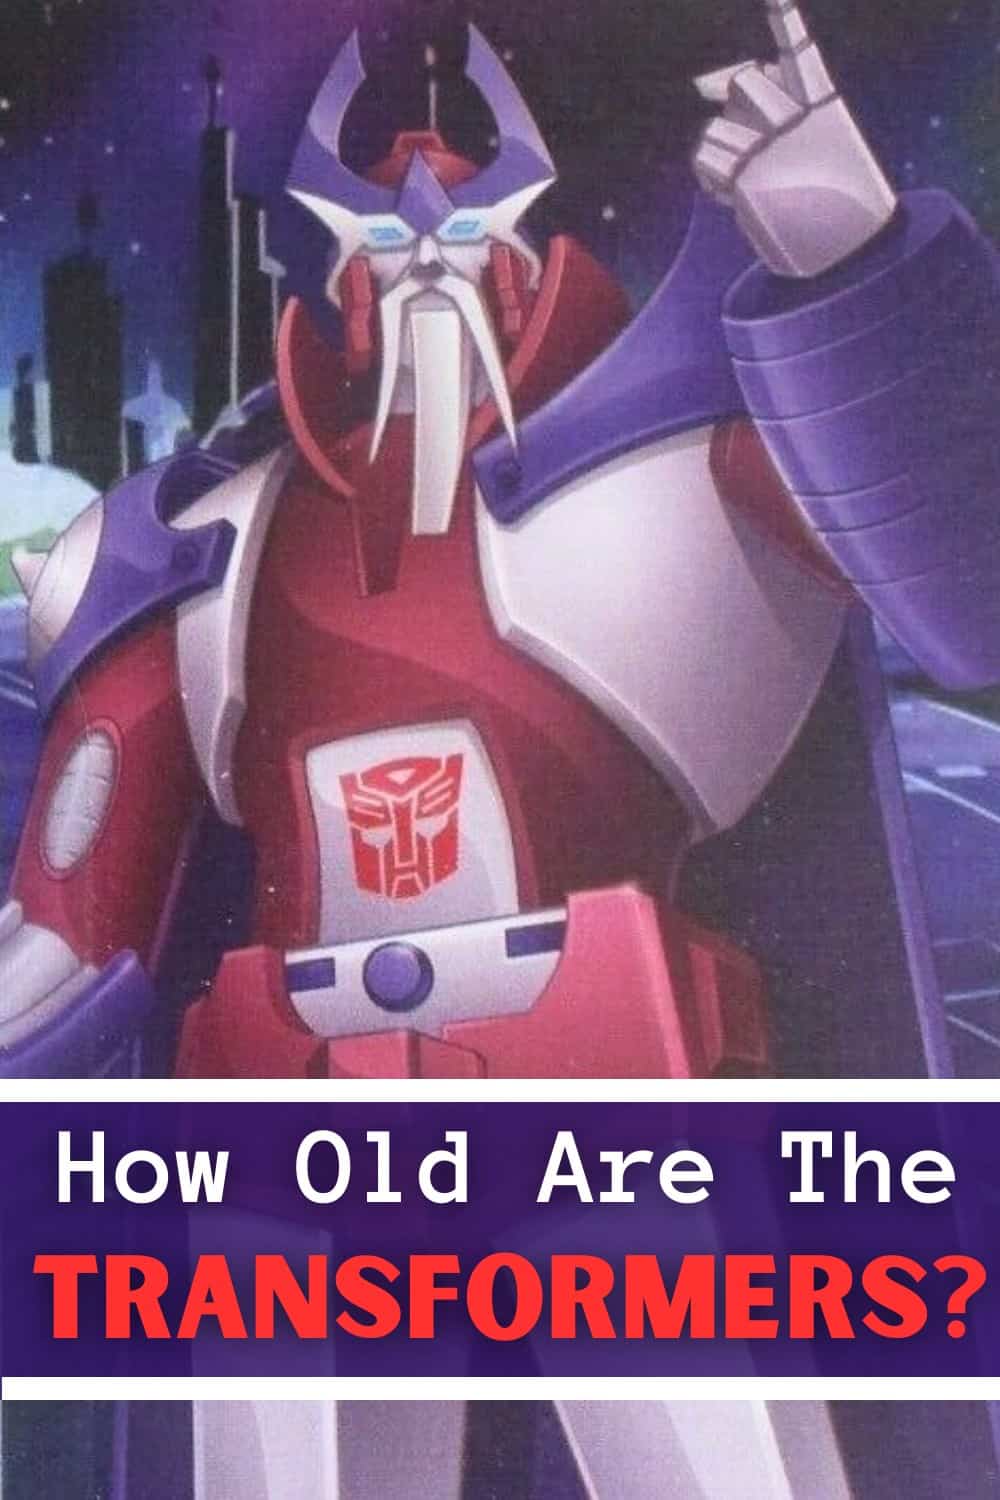 Transformers are 4 million years old or older